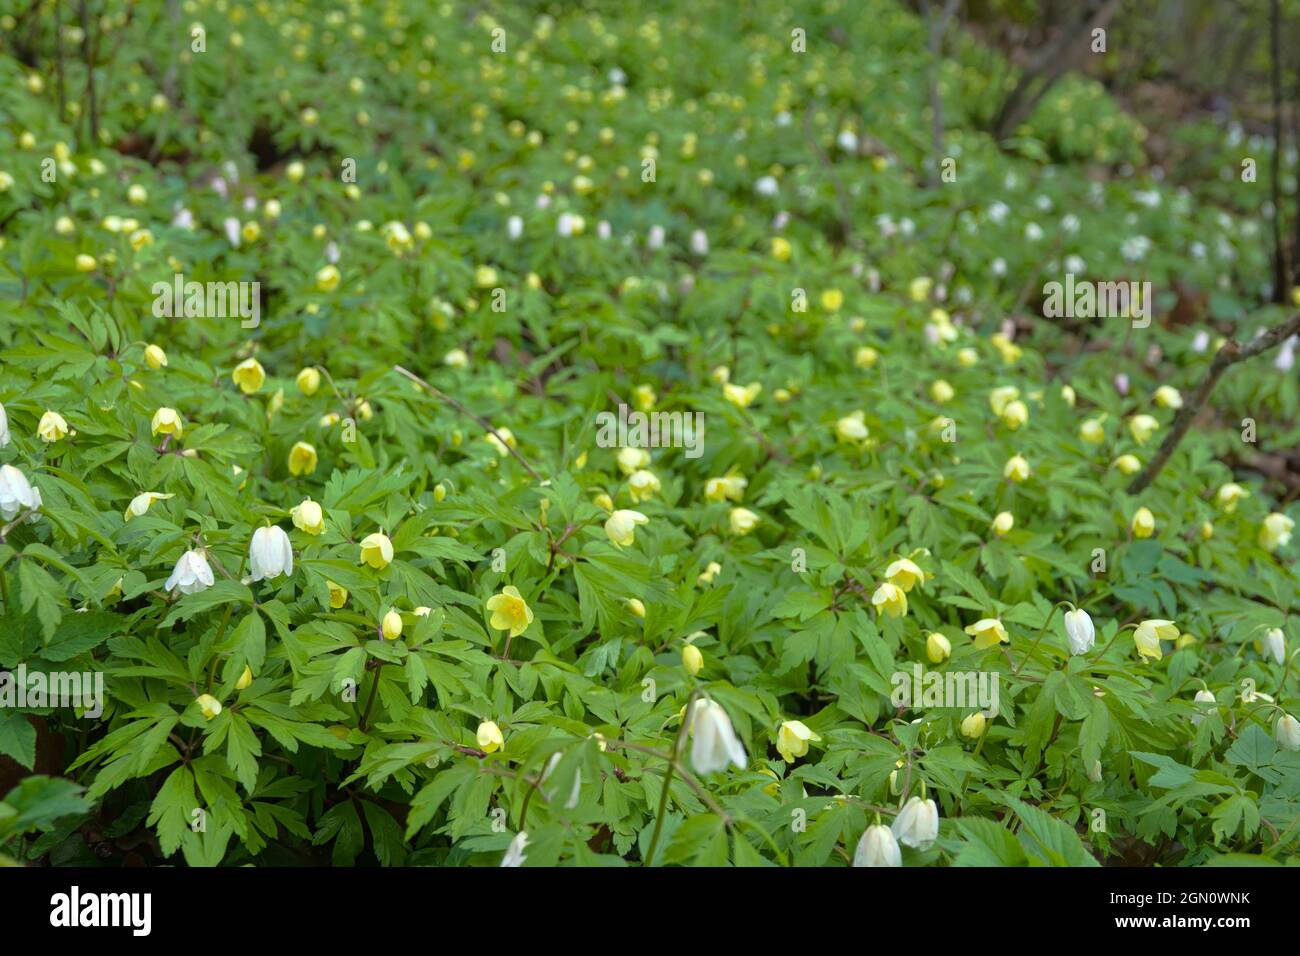 Early bloomers (primroses) of northern European forests. European wood anemone (Anemone nemorosa) and Yellow wood anemone (Anemone ranunculoides) in p Stock Photo